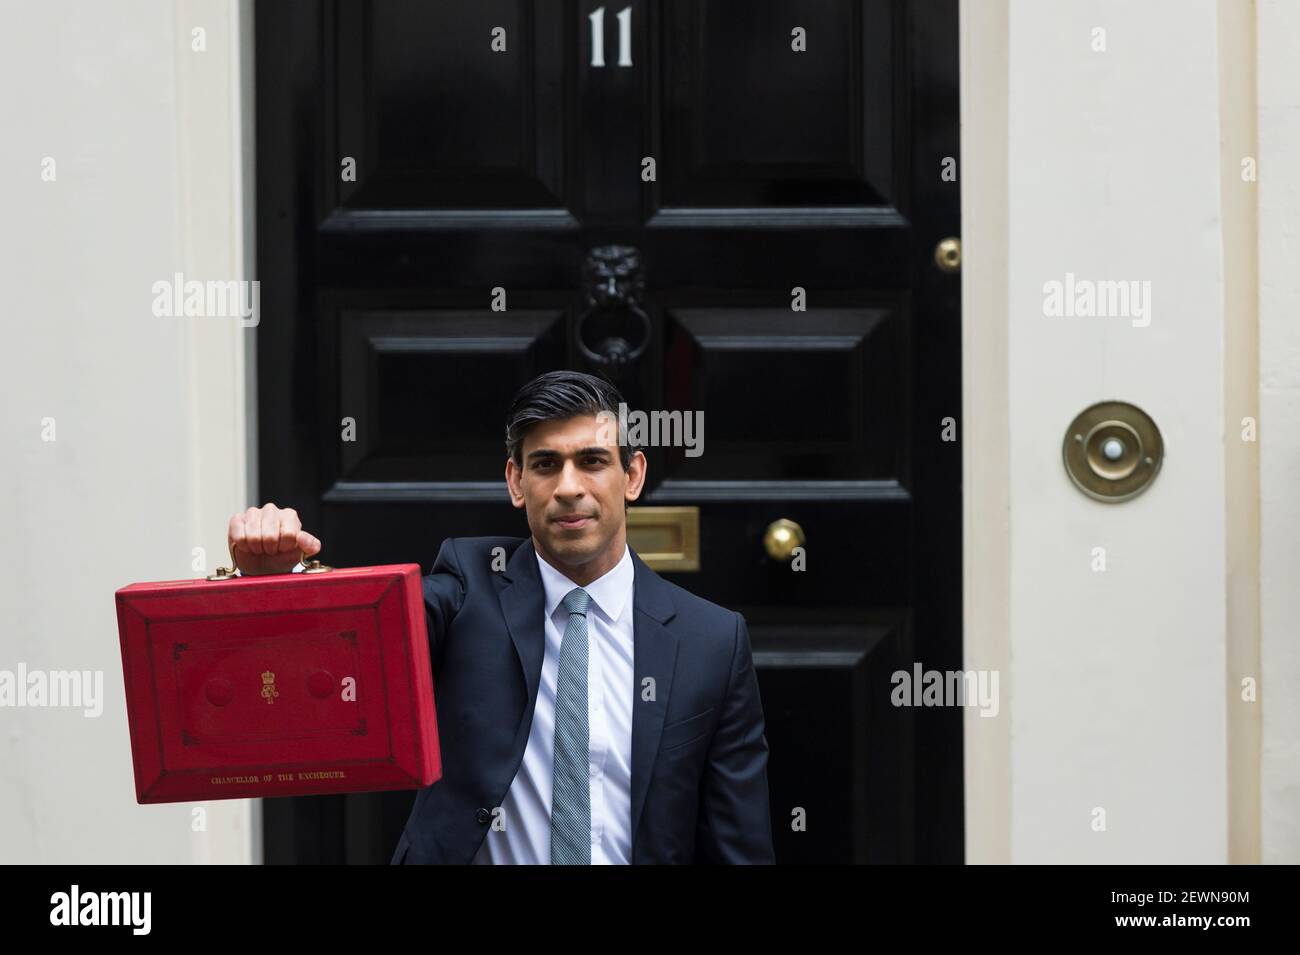 London, UK.  3 March 2021.  Rishi Sunak, Chancellor of the Exchequer, departs Number 11 Downing Street to deliver his Budget speech in the House of Commons.  It is expected that his statement will cover plans to support the country’s economic recovery during the ongoing Covid-19 pandemic, including an extension to the employee furlough scheme.  Credit: Stephen Chung / Alamy Live News Stock Photo